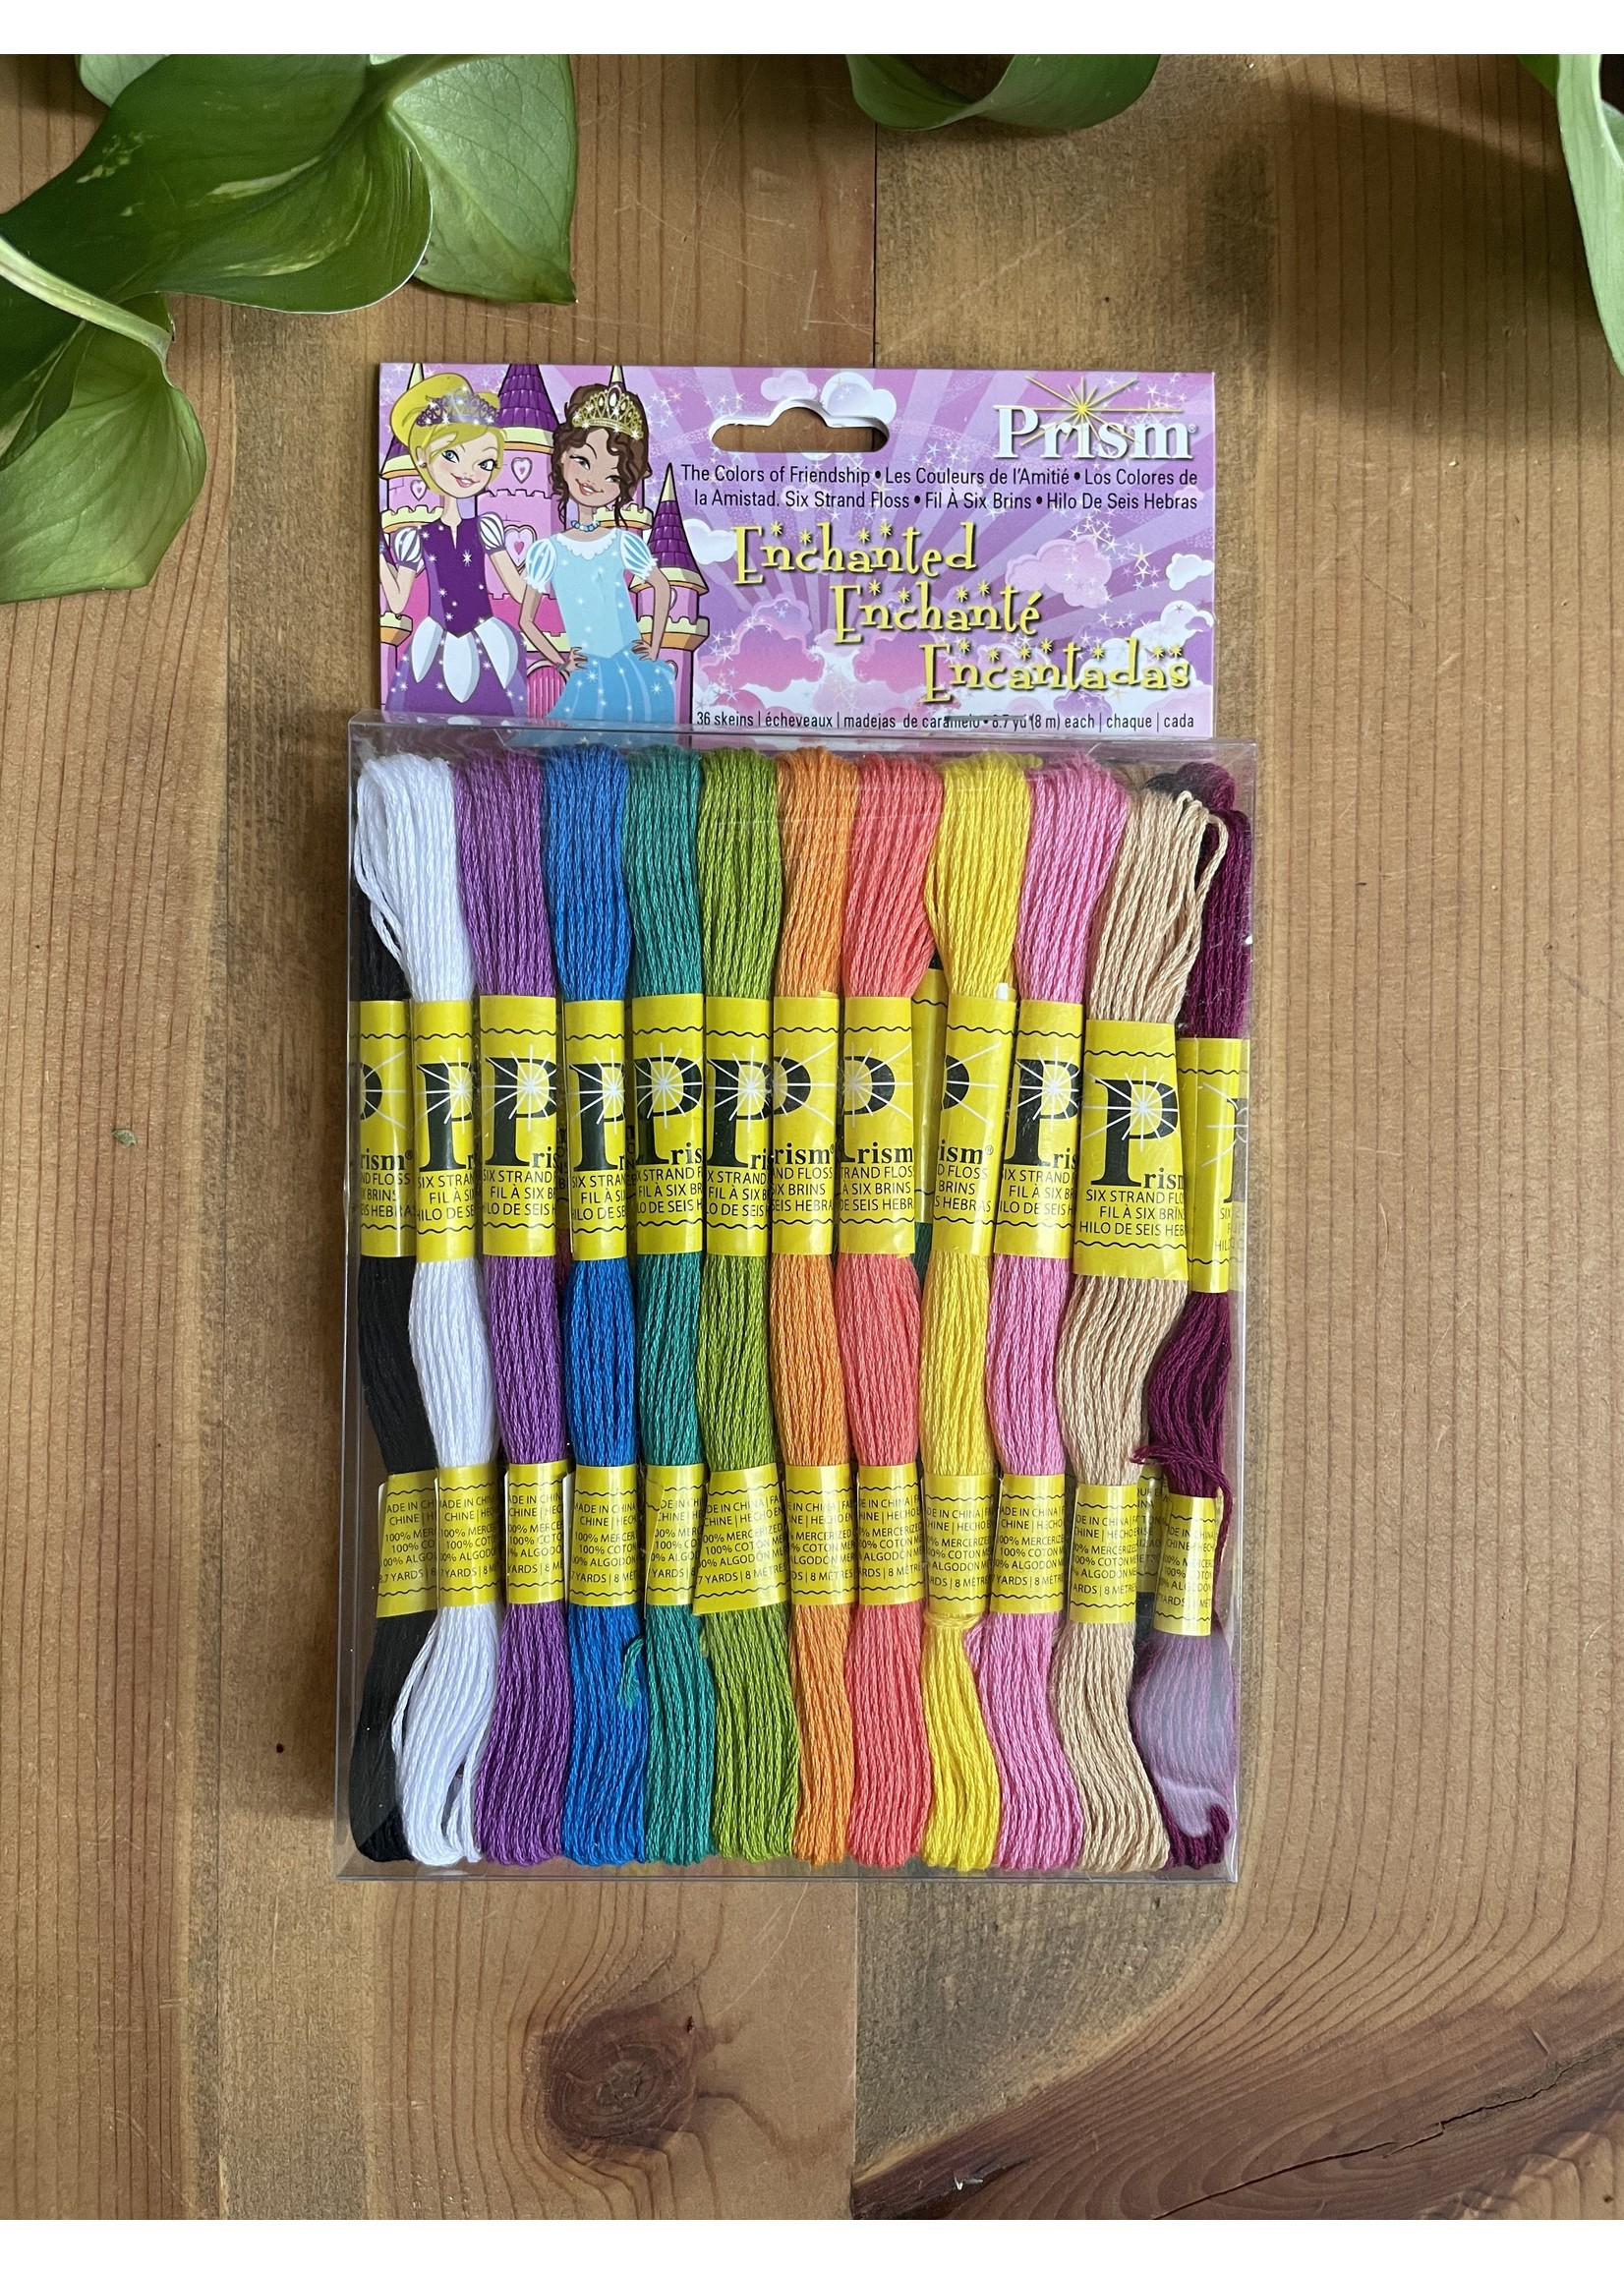 Prism Colors Of Friendship Embroidery Floss DMC Craft 36 Skeins 10 Yards  NIP